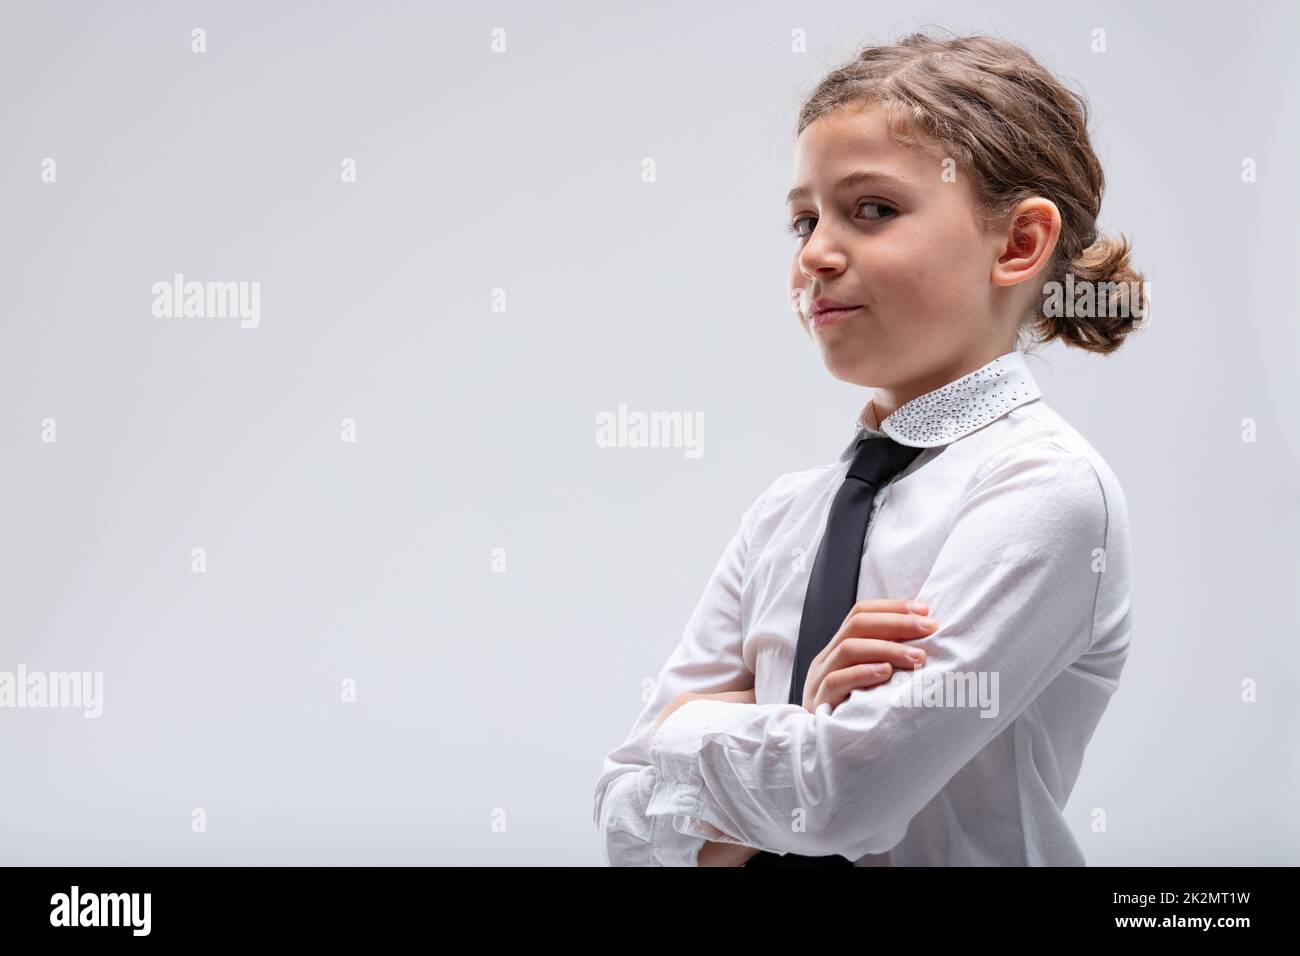 Young girl looking speculatively at the camera Stock Photo